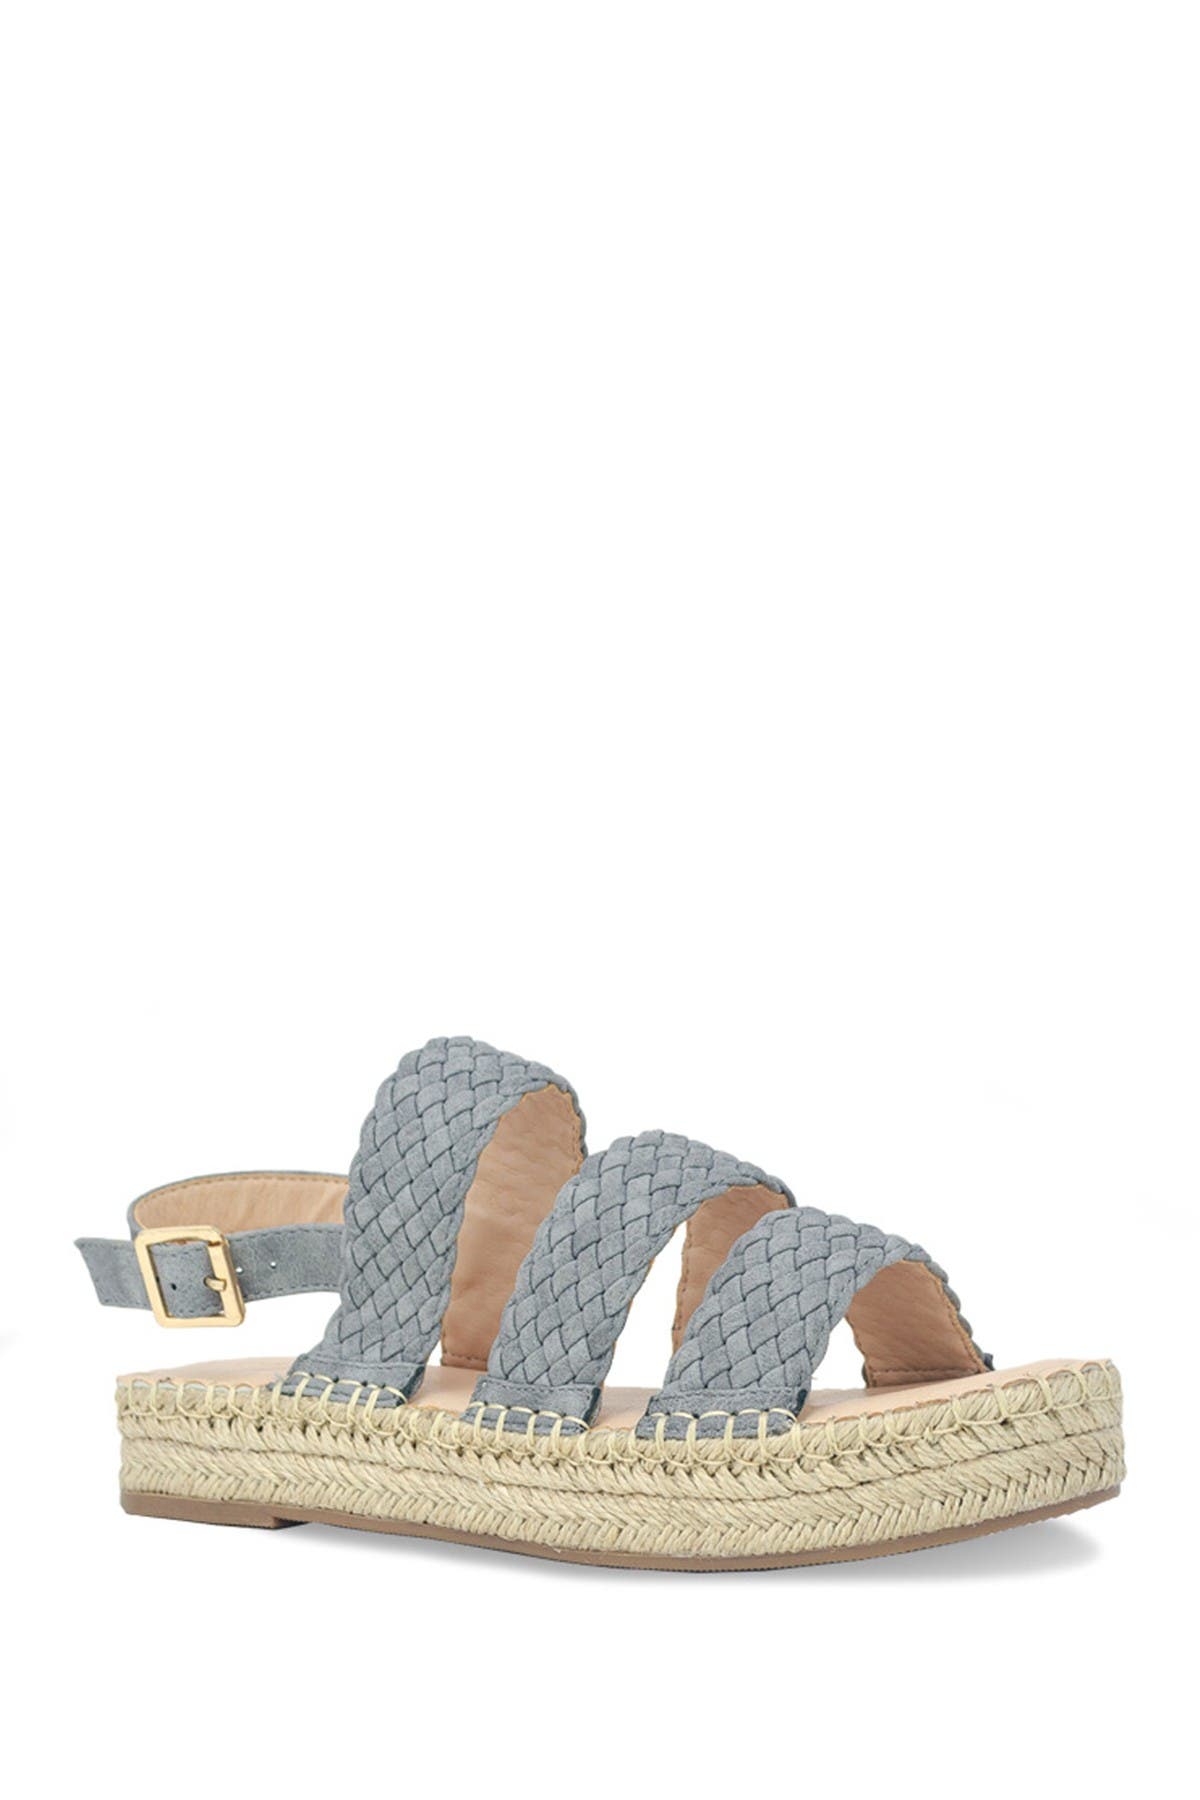 chase and chloe espadrilles